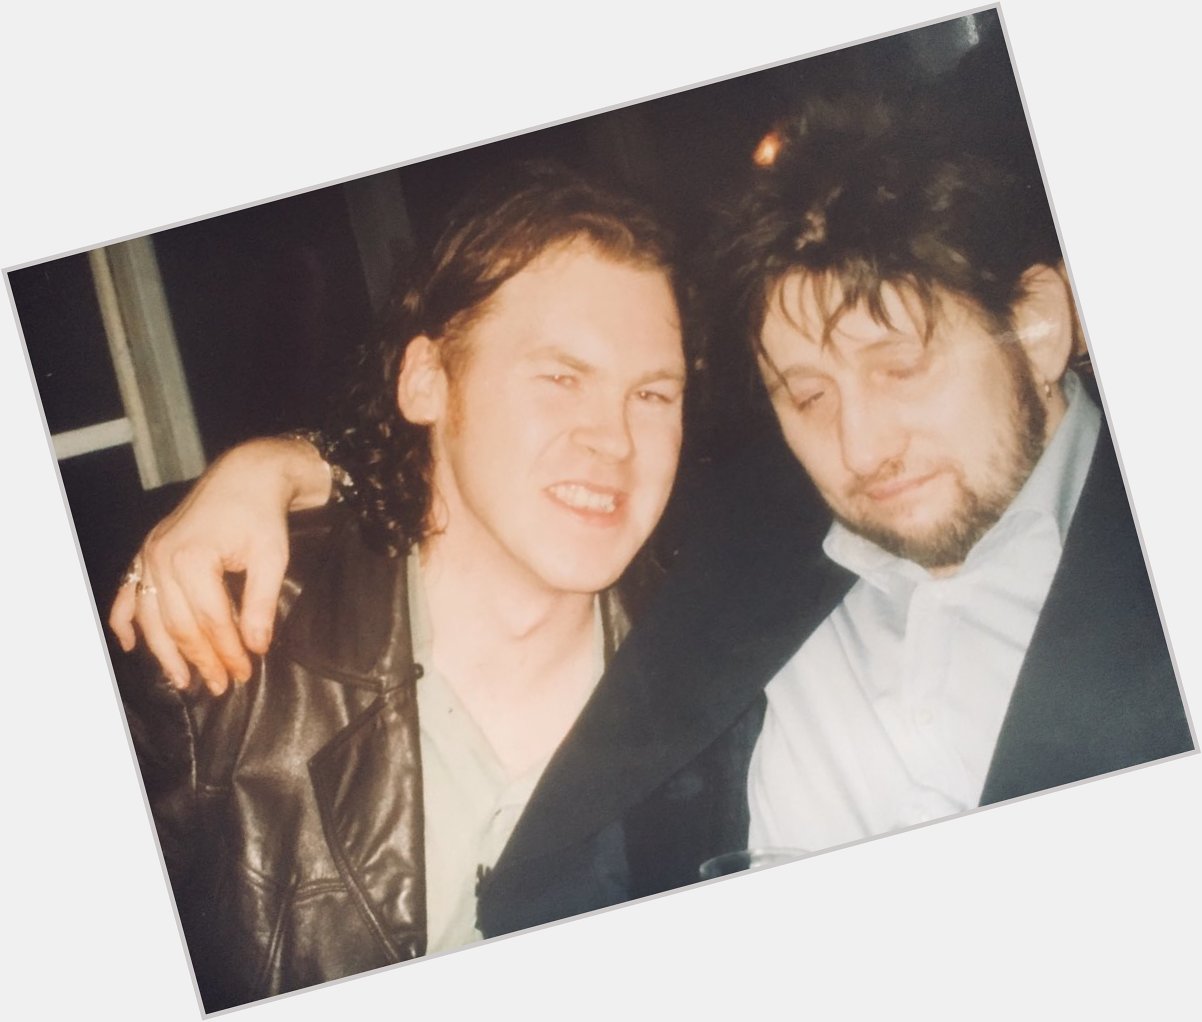 He owes the world nothing, but Ireland owes Shane MacGowan some of its soul. 

Happy Birthday 